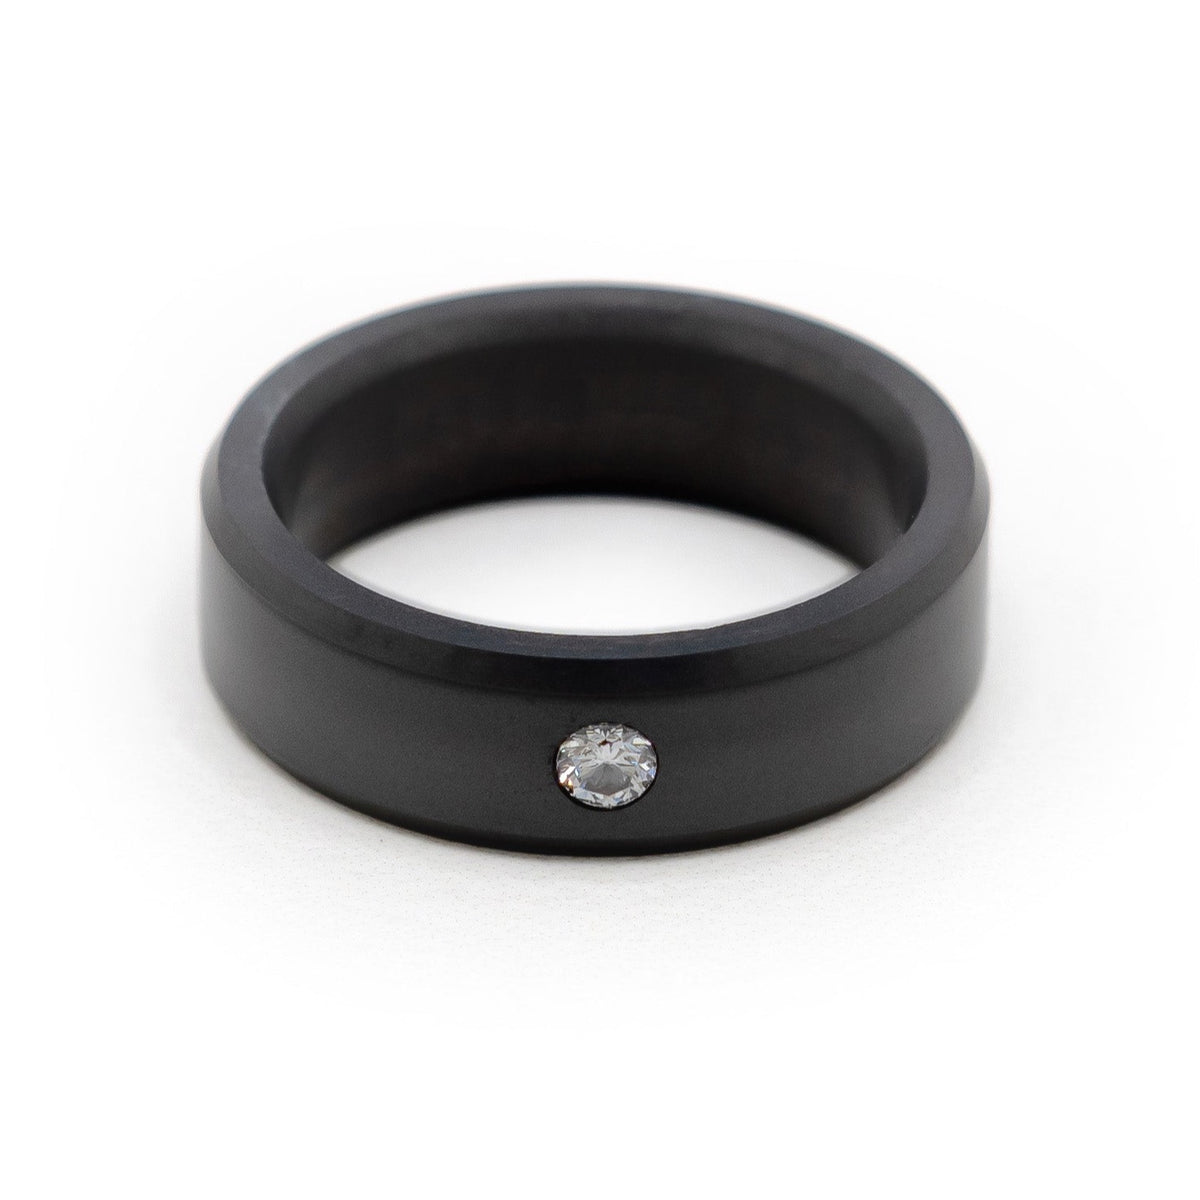 Ares Beveled Diamond Inset Ring 7mm